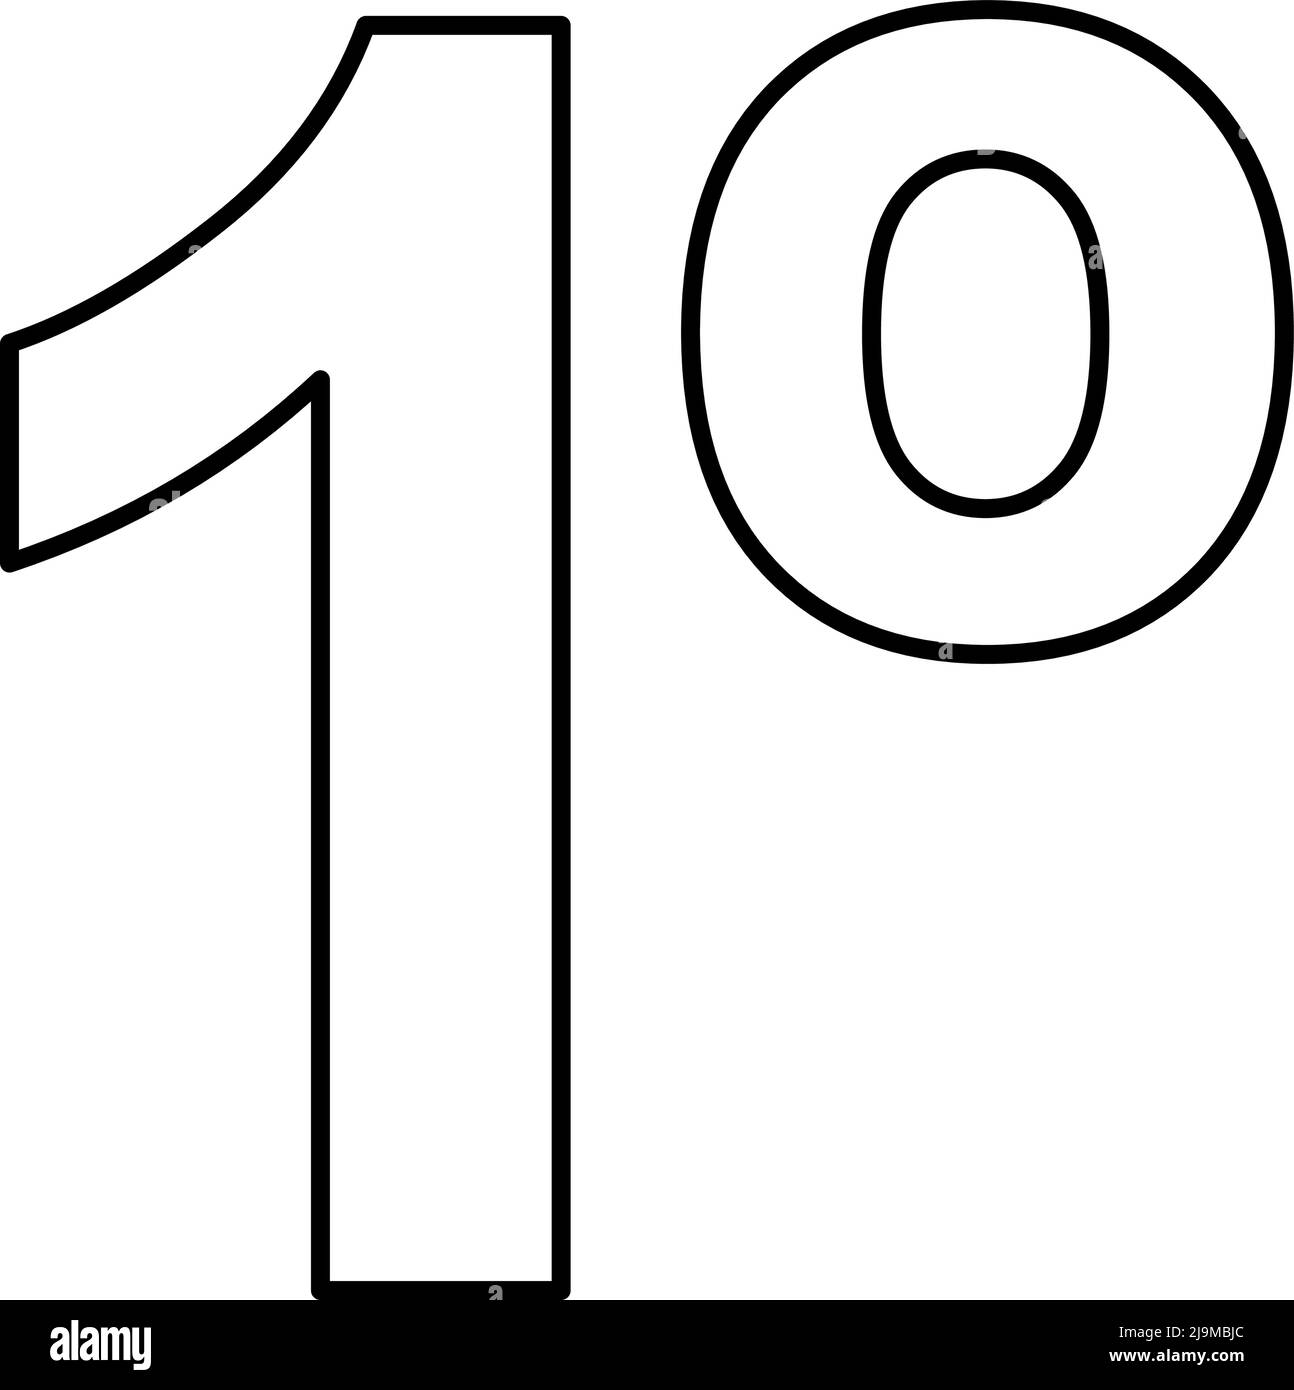 First sign, number one. Black outlines on white background. Stock Vector